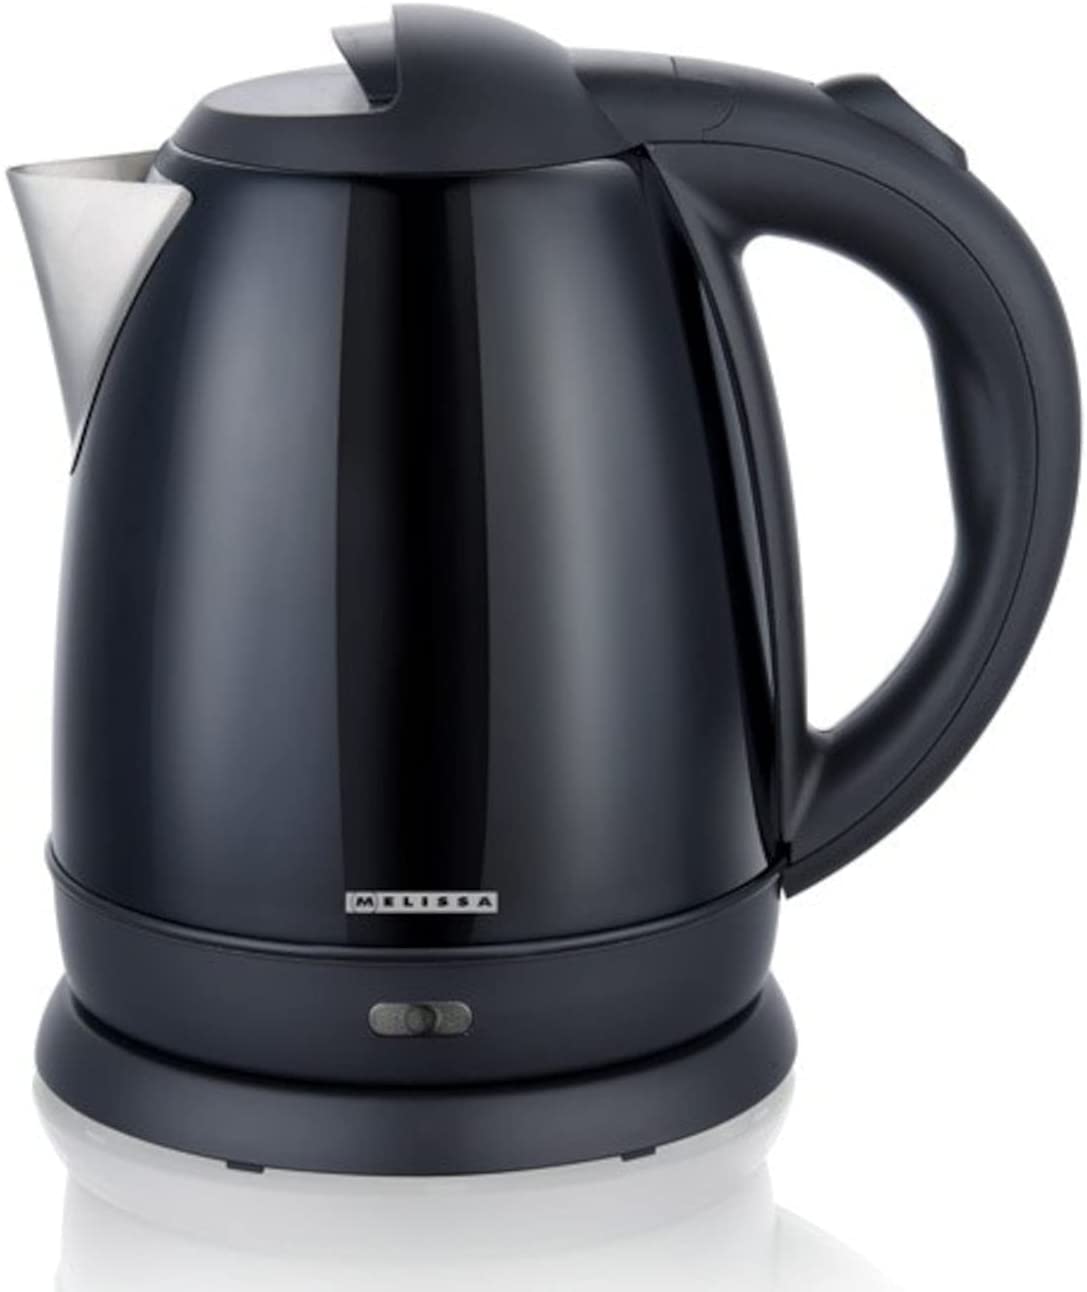 Melissa 1.2 litre cordless kettle with concealed heating element made of stainless steel - painted (black)